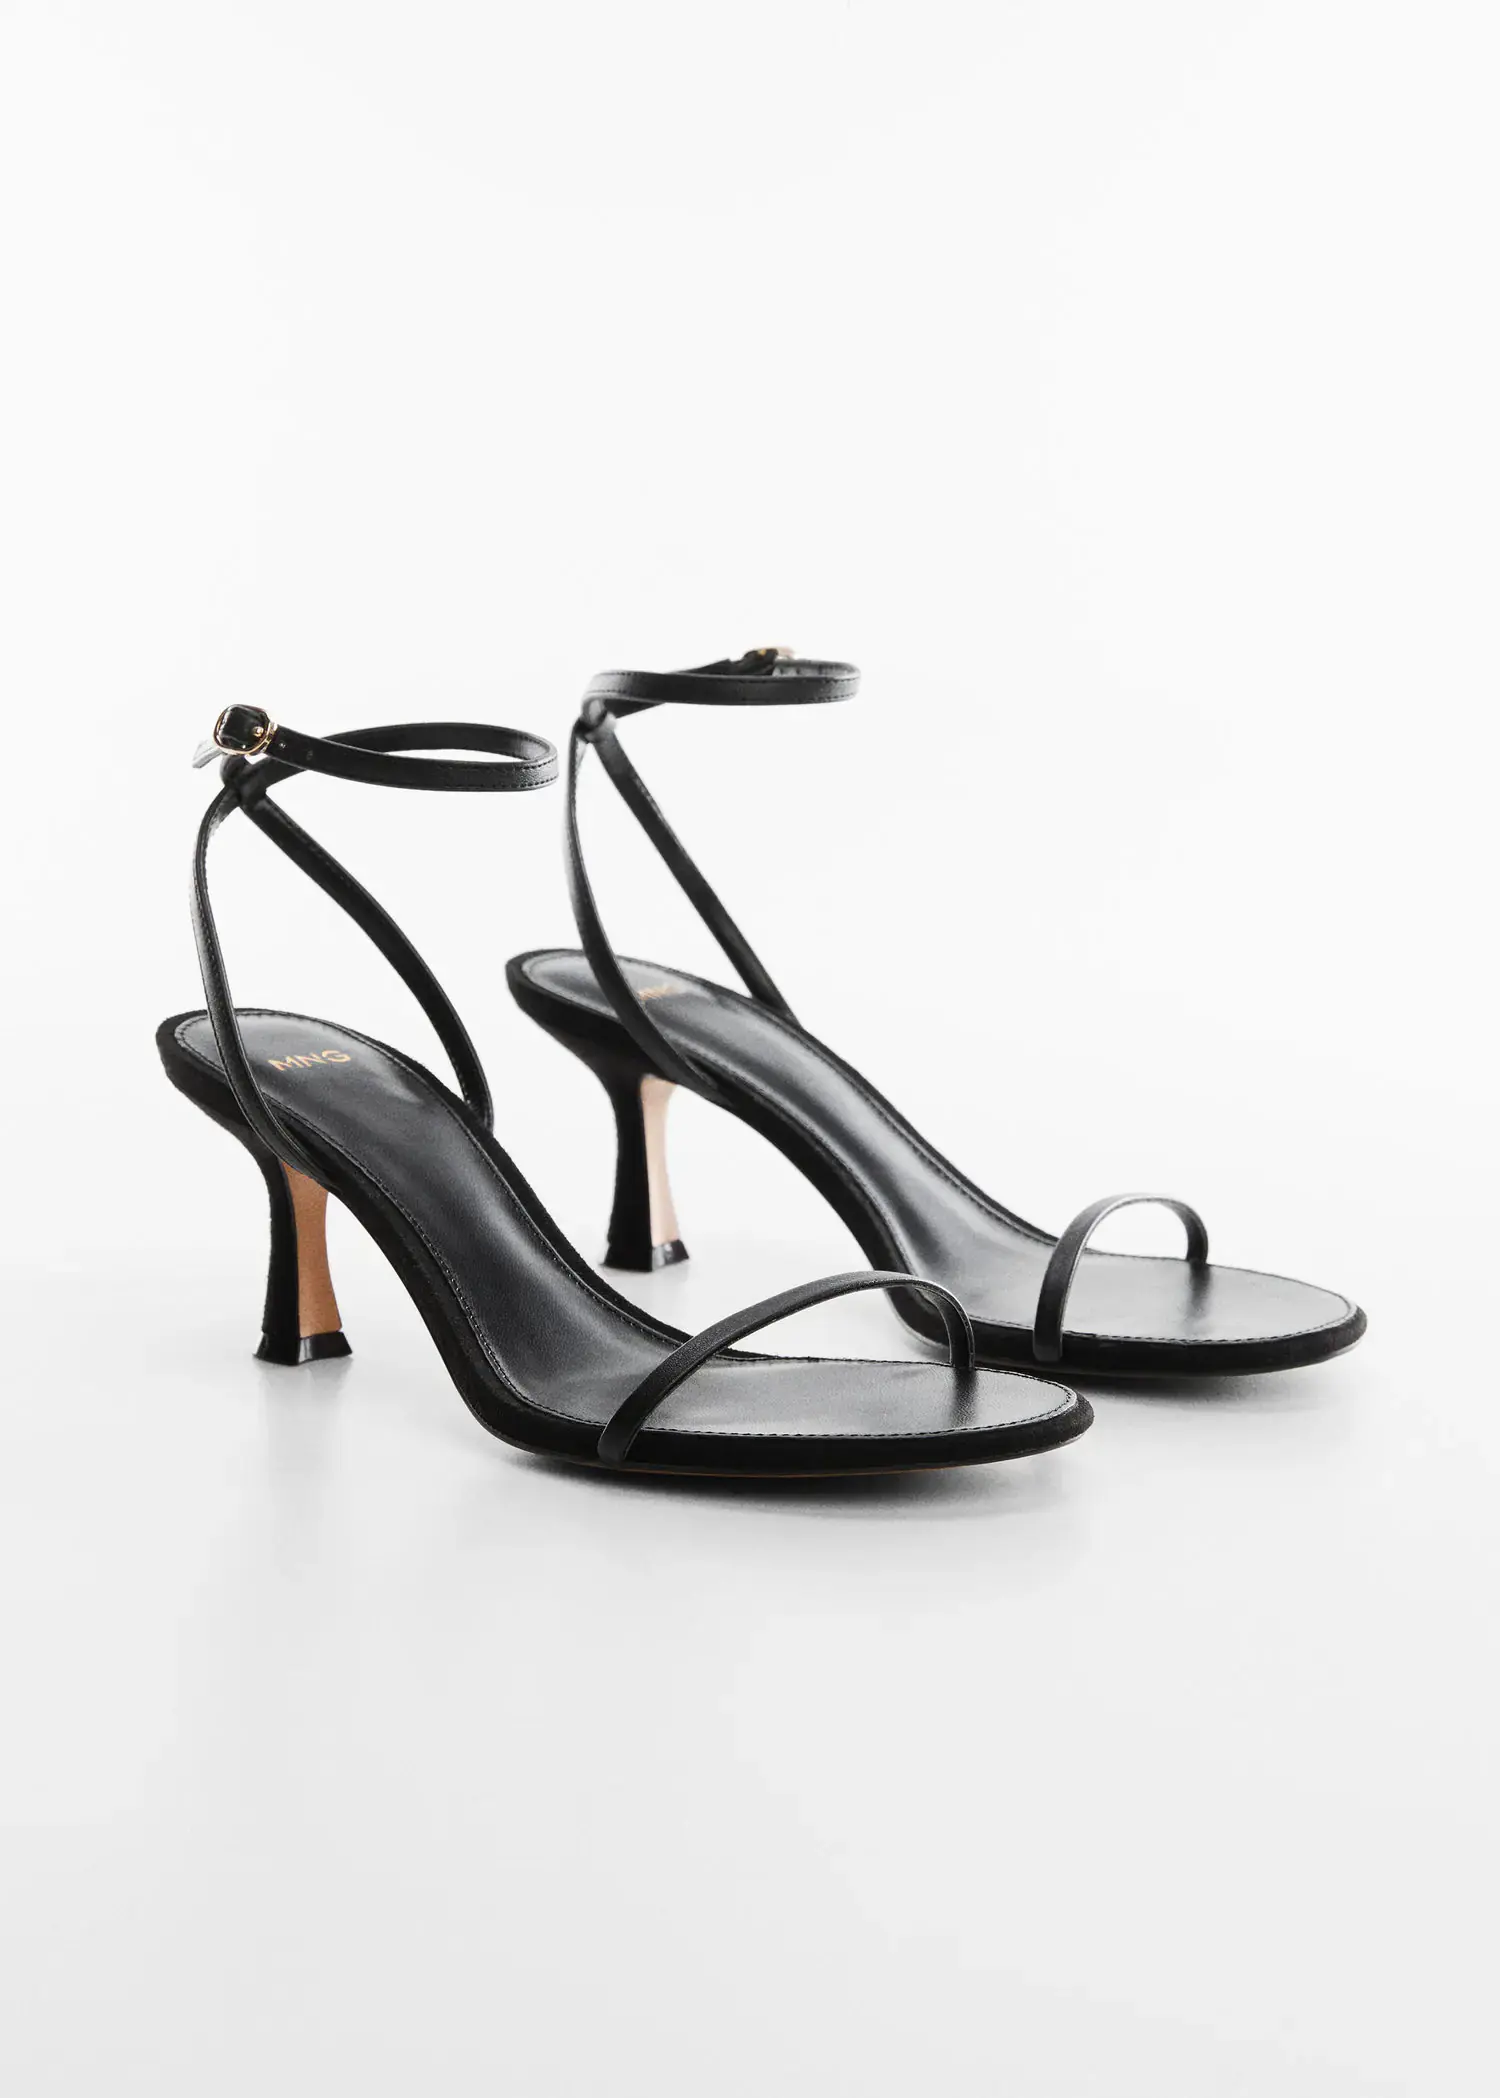 Mango Ankle-cuff heeled sandals. a pair of black high heeled sandals on a white surface. 